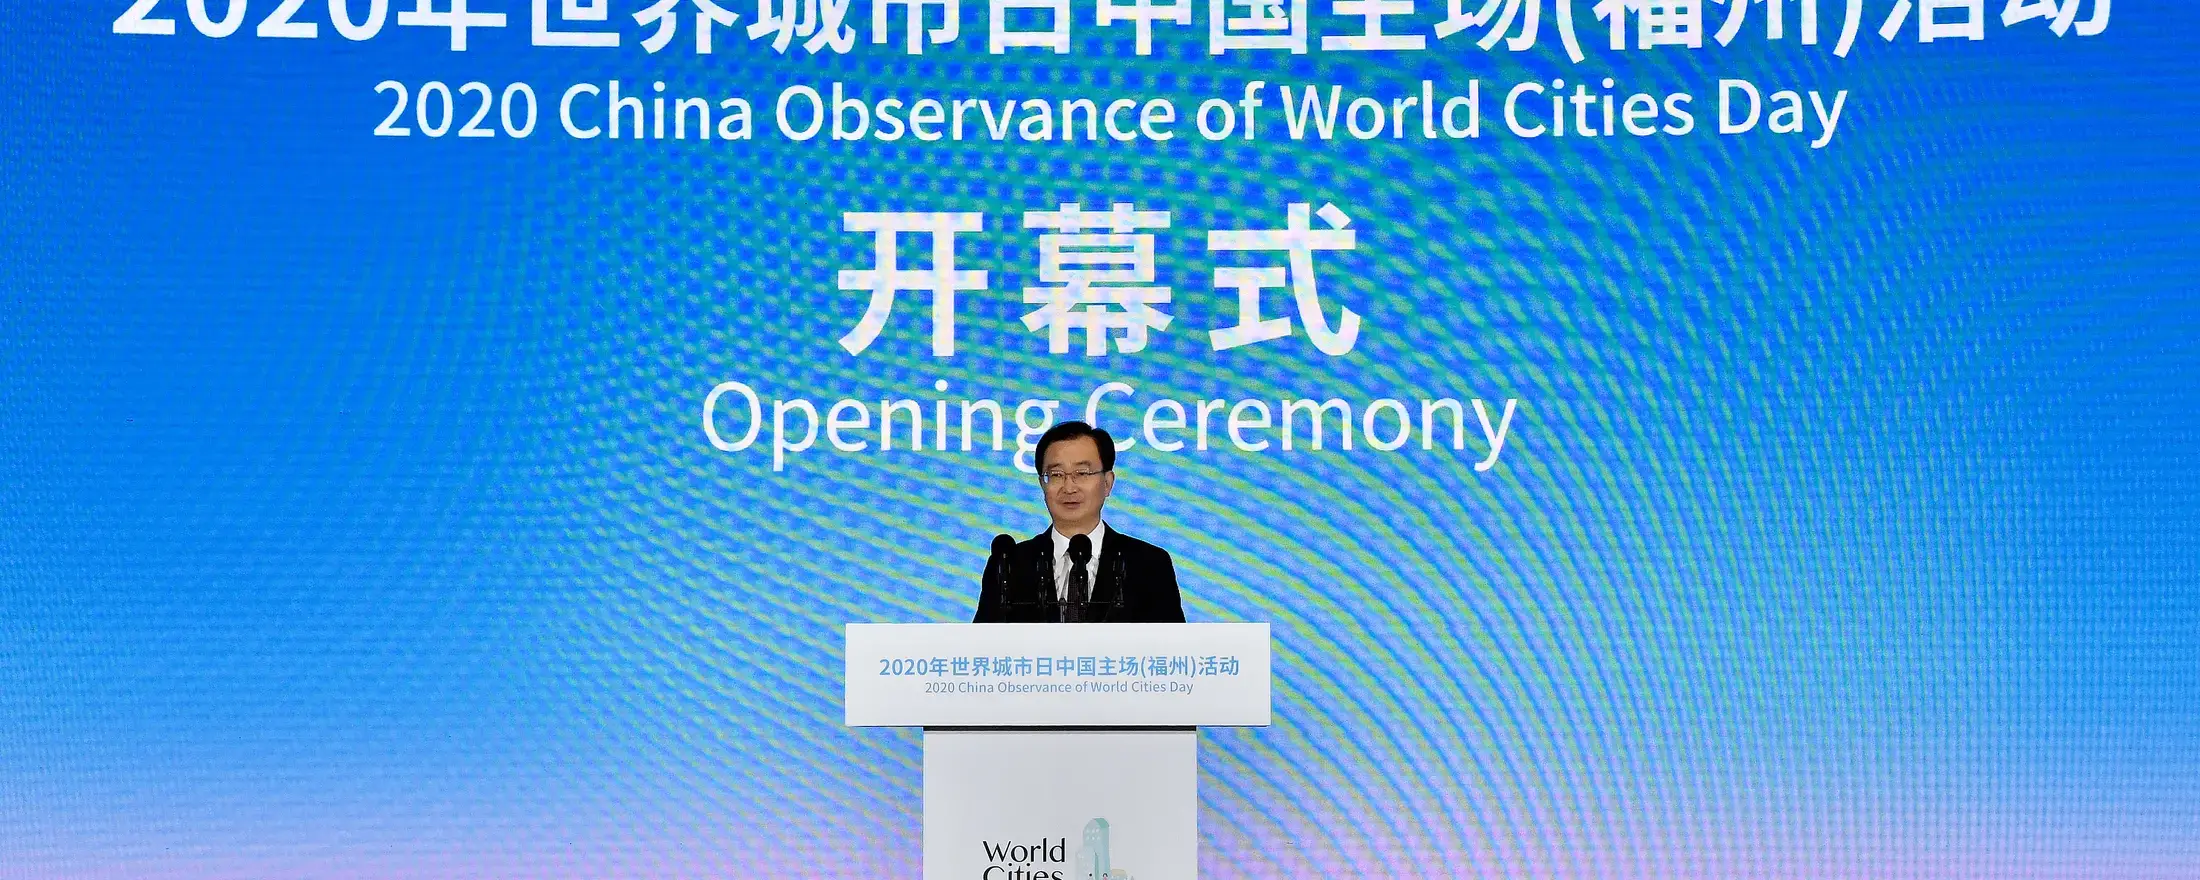 Governor of Fujian Province opens national World Cities Day 2020 in Fuzhou China